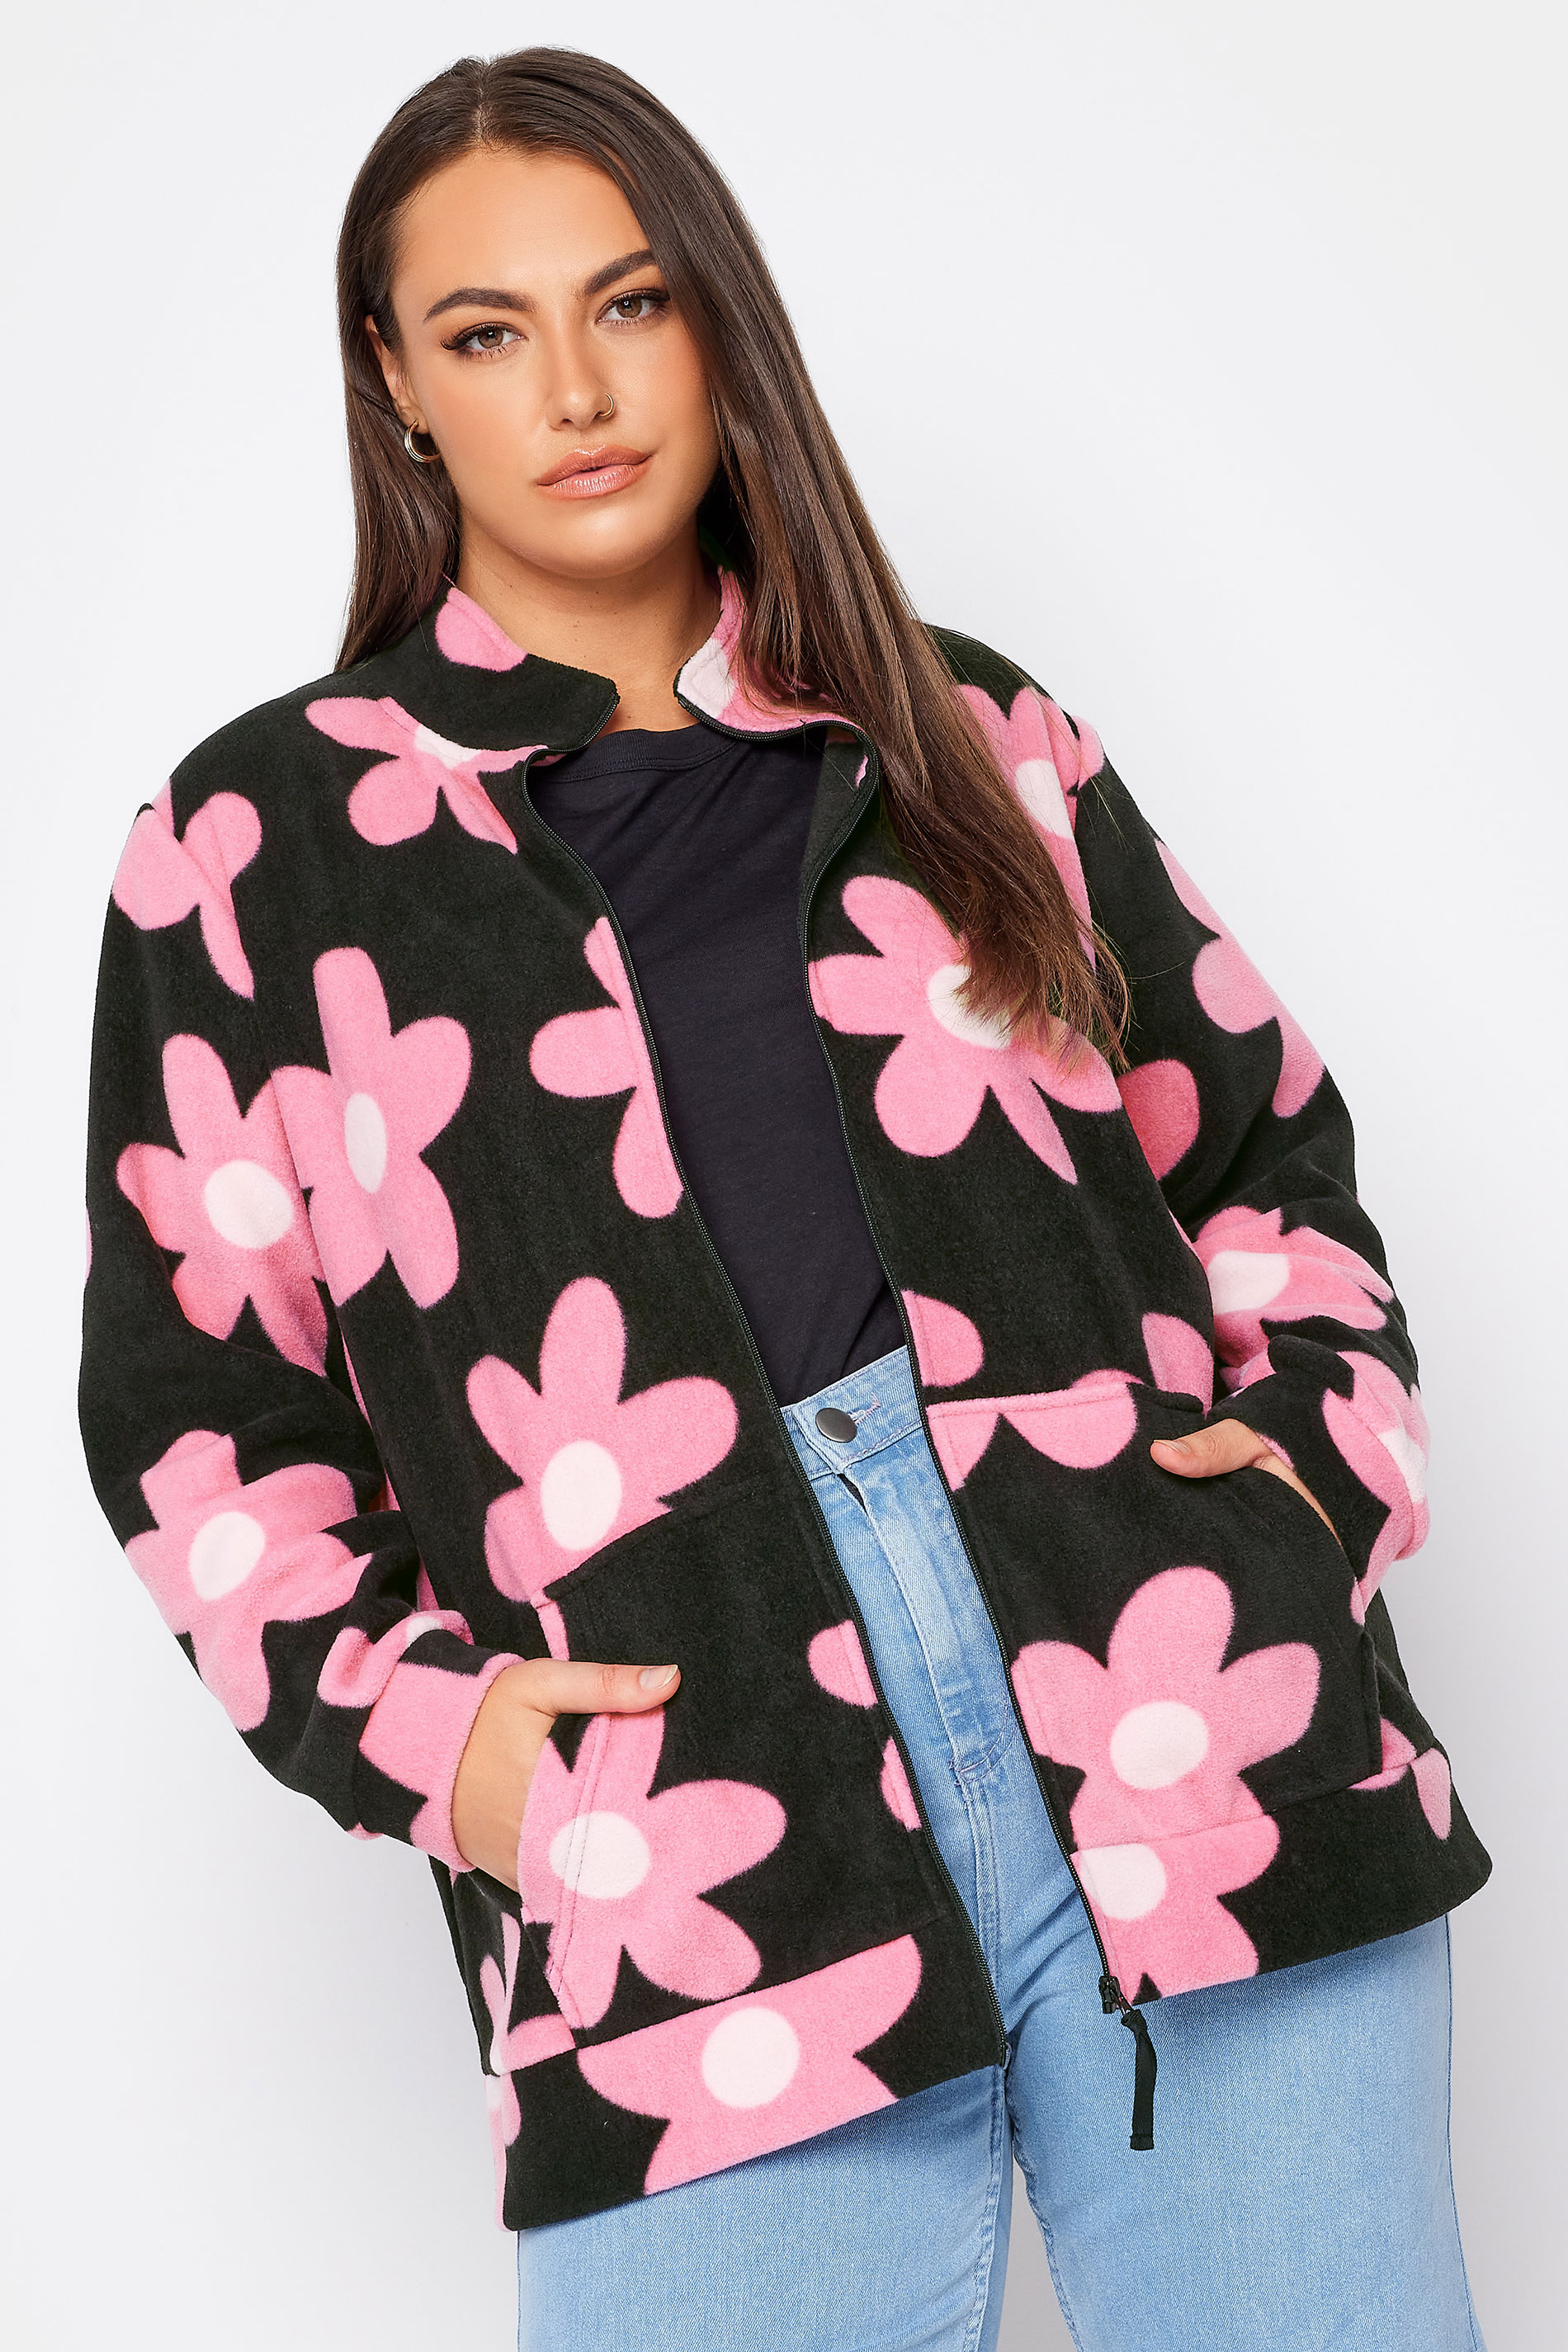 Product Video For YOURS Plus Size Black Floral Zip Fleece Jacket | Yours Clothing 1